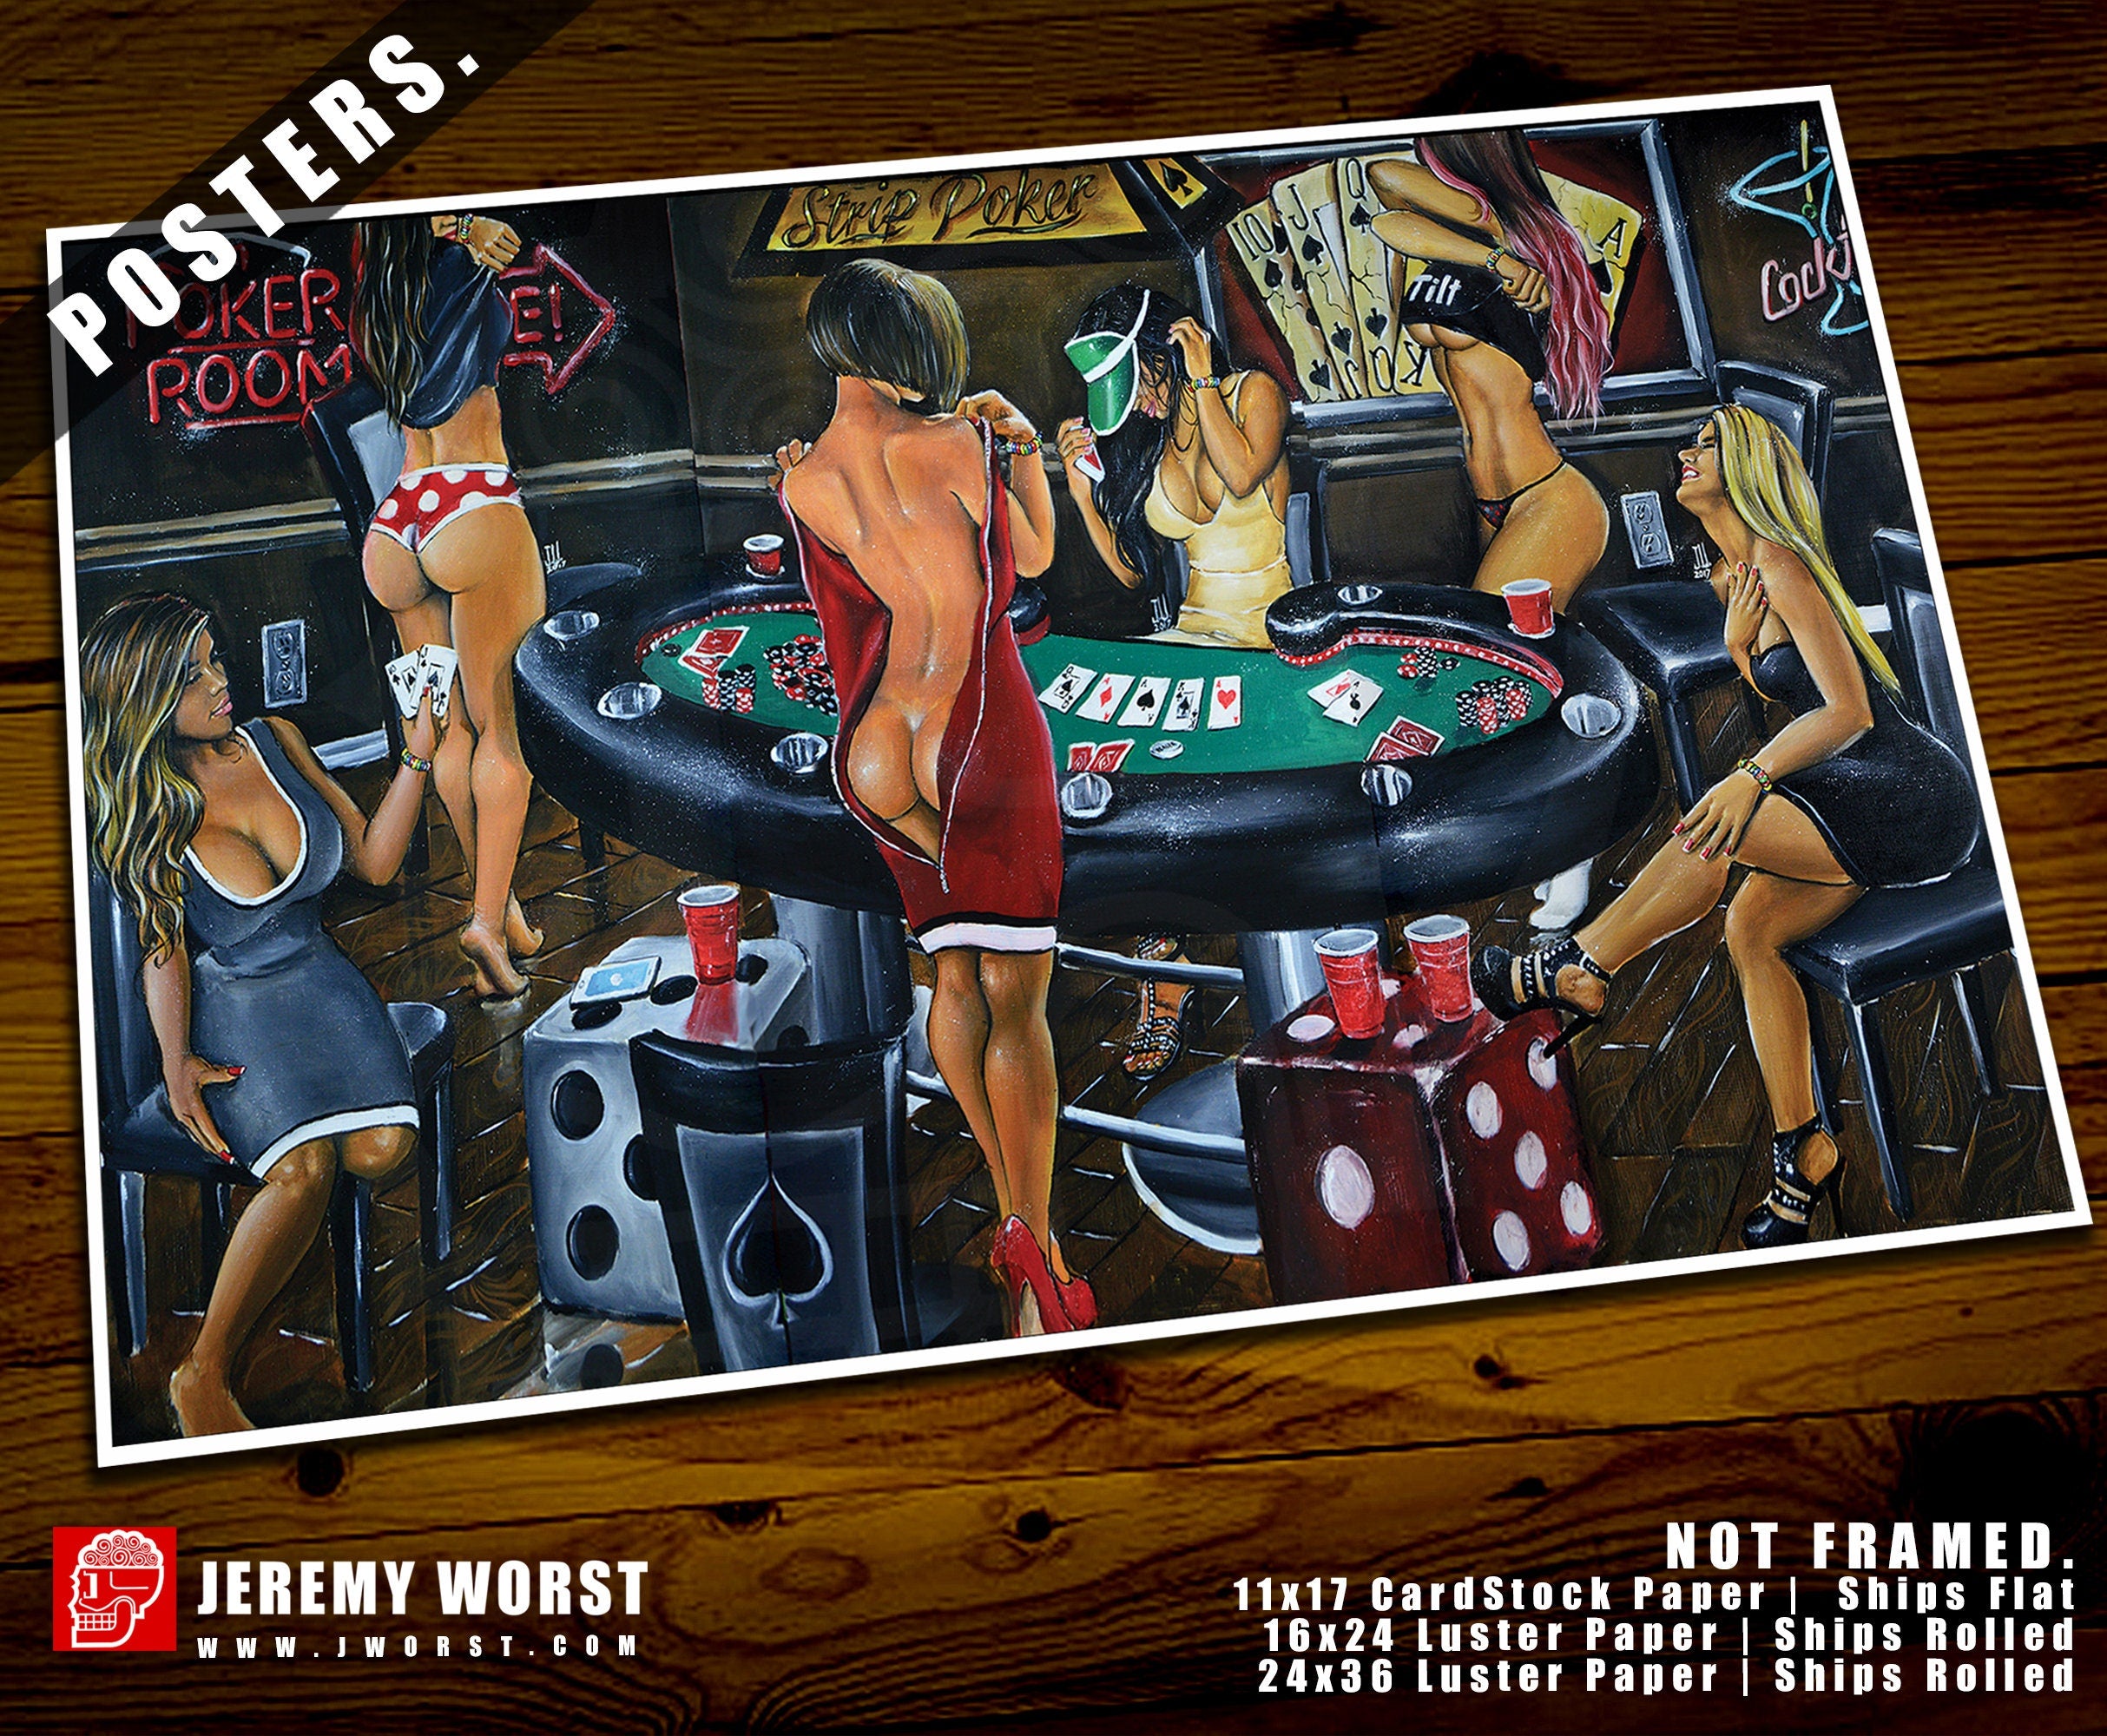 Strip Poker Canvas Wall Art Decor Game Room Table Gifts sexy blackjack